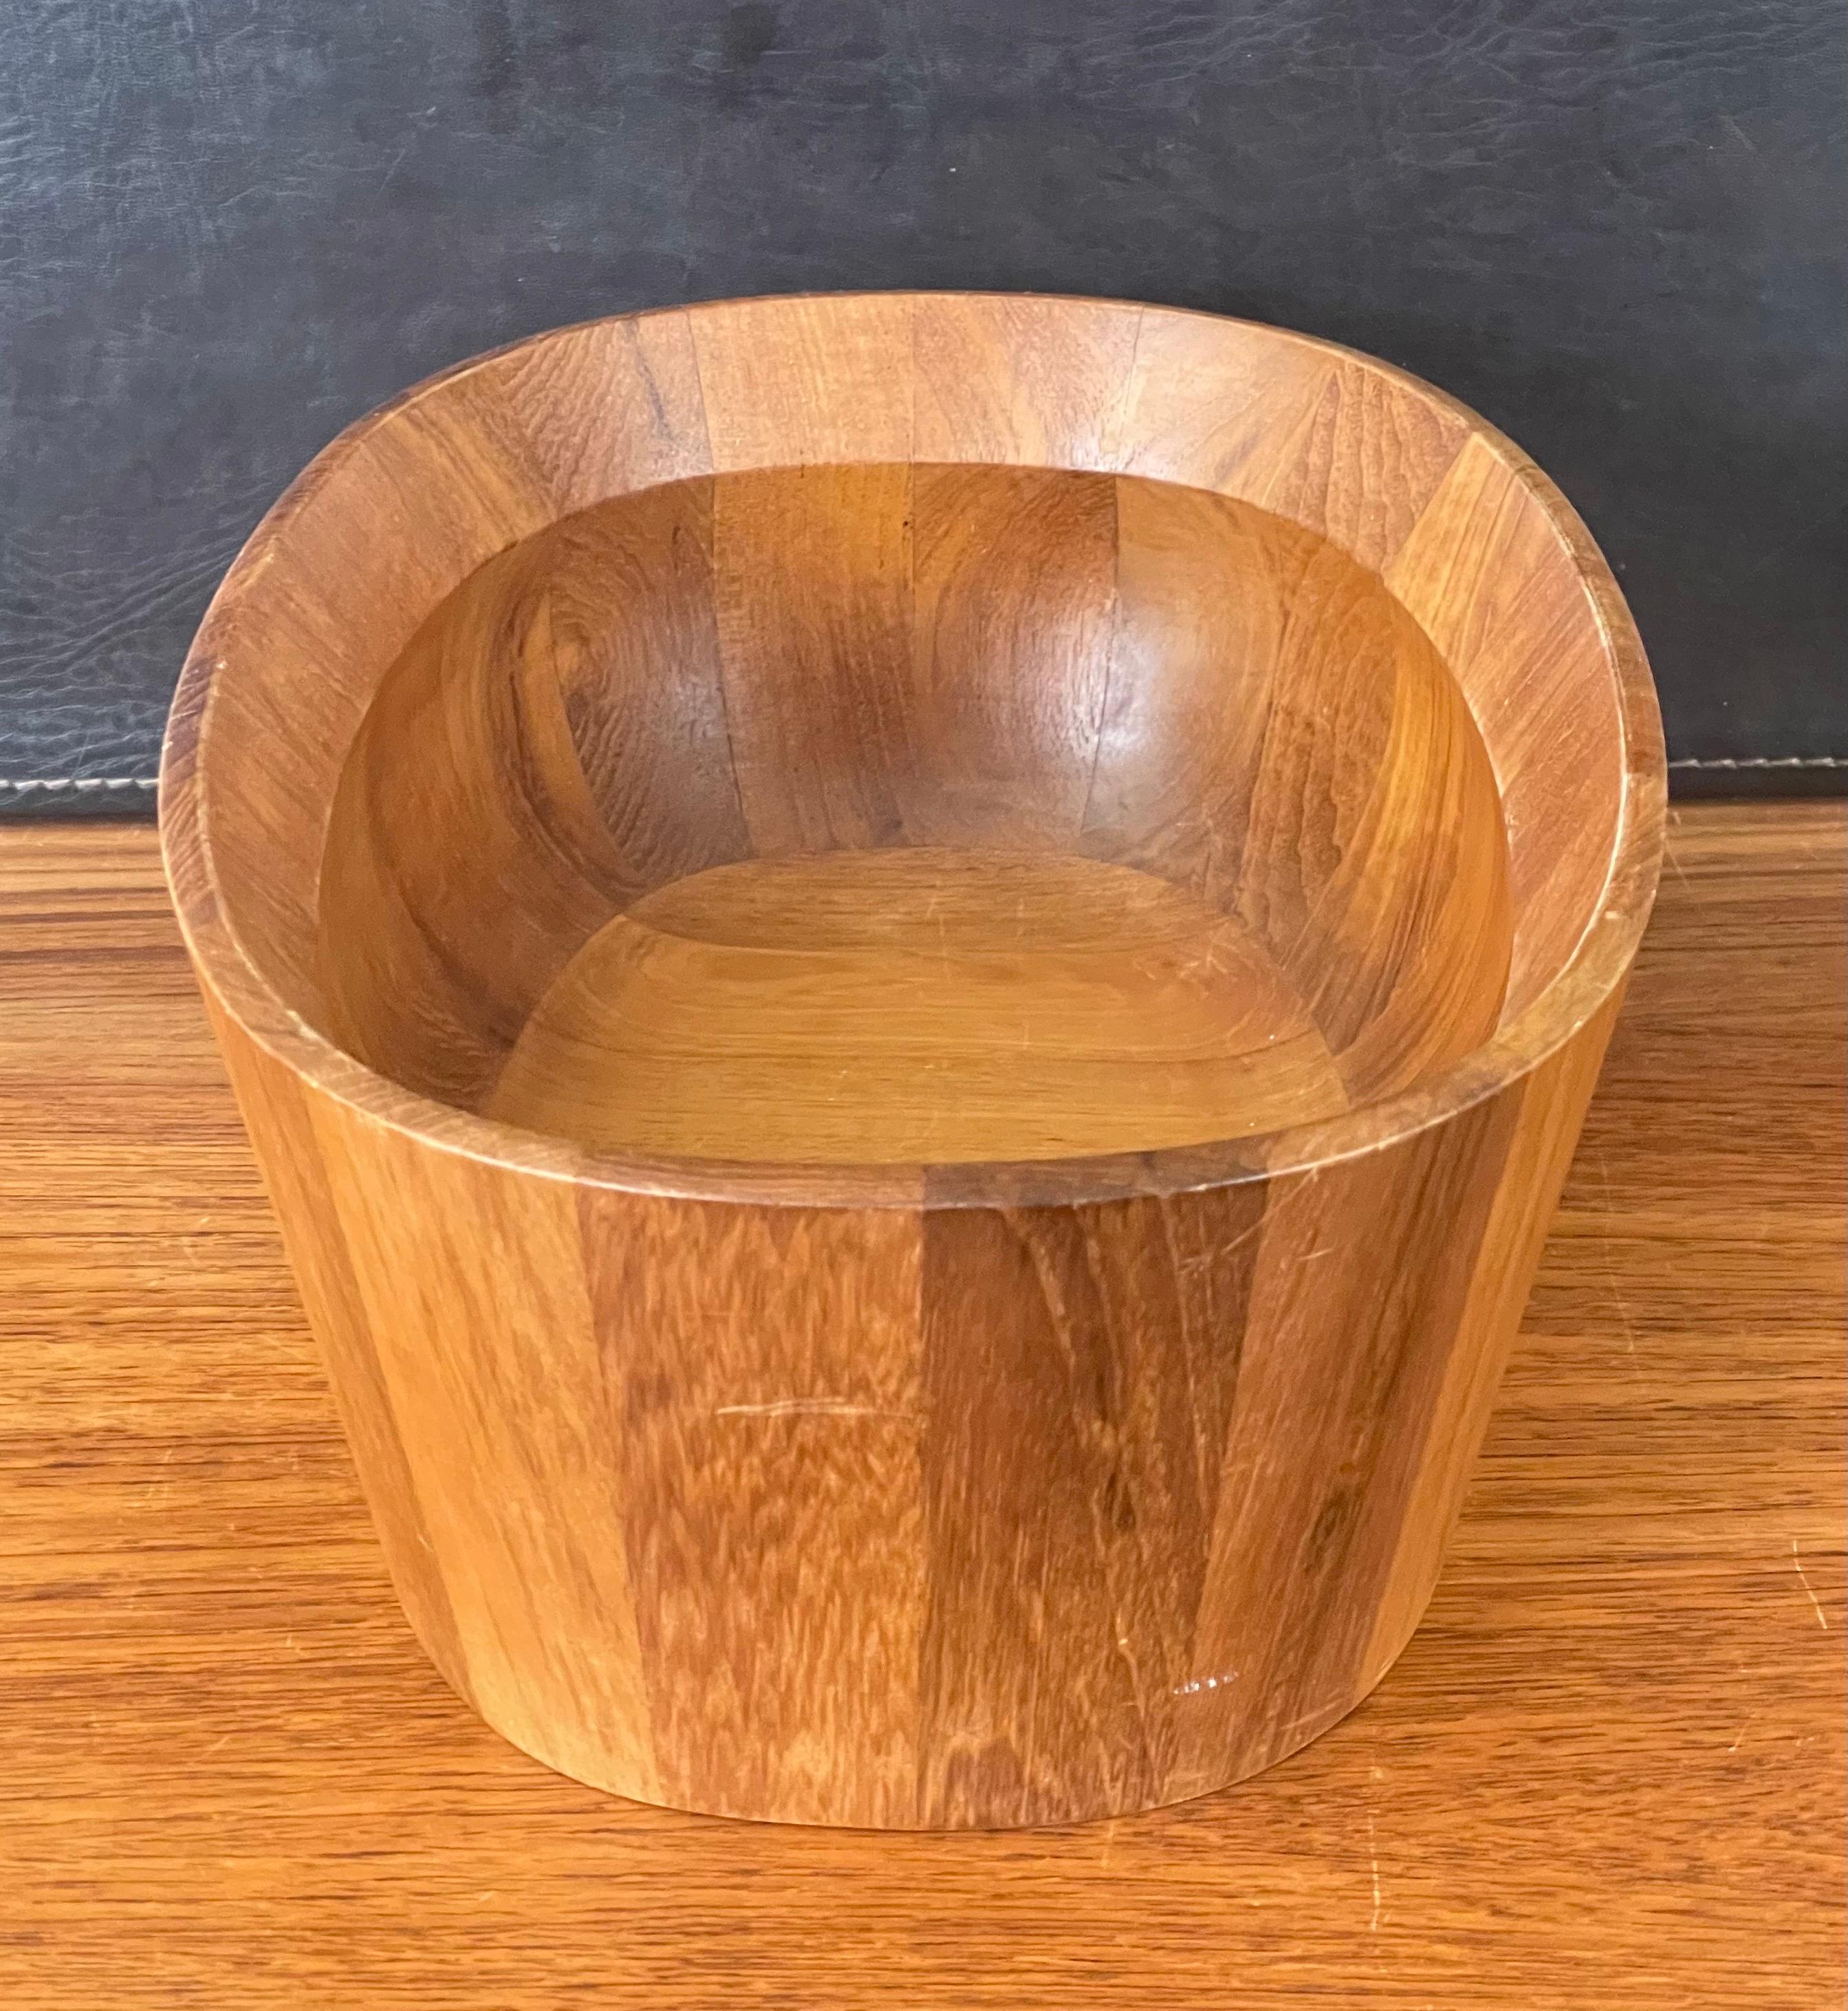 Danish Modern Oval Shaped Staved Teak Bowl by Jens Quistgaard for Dansk In Good Condition For Sale In San Diego, CA